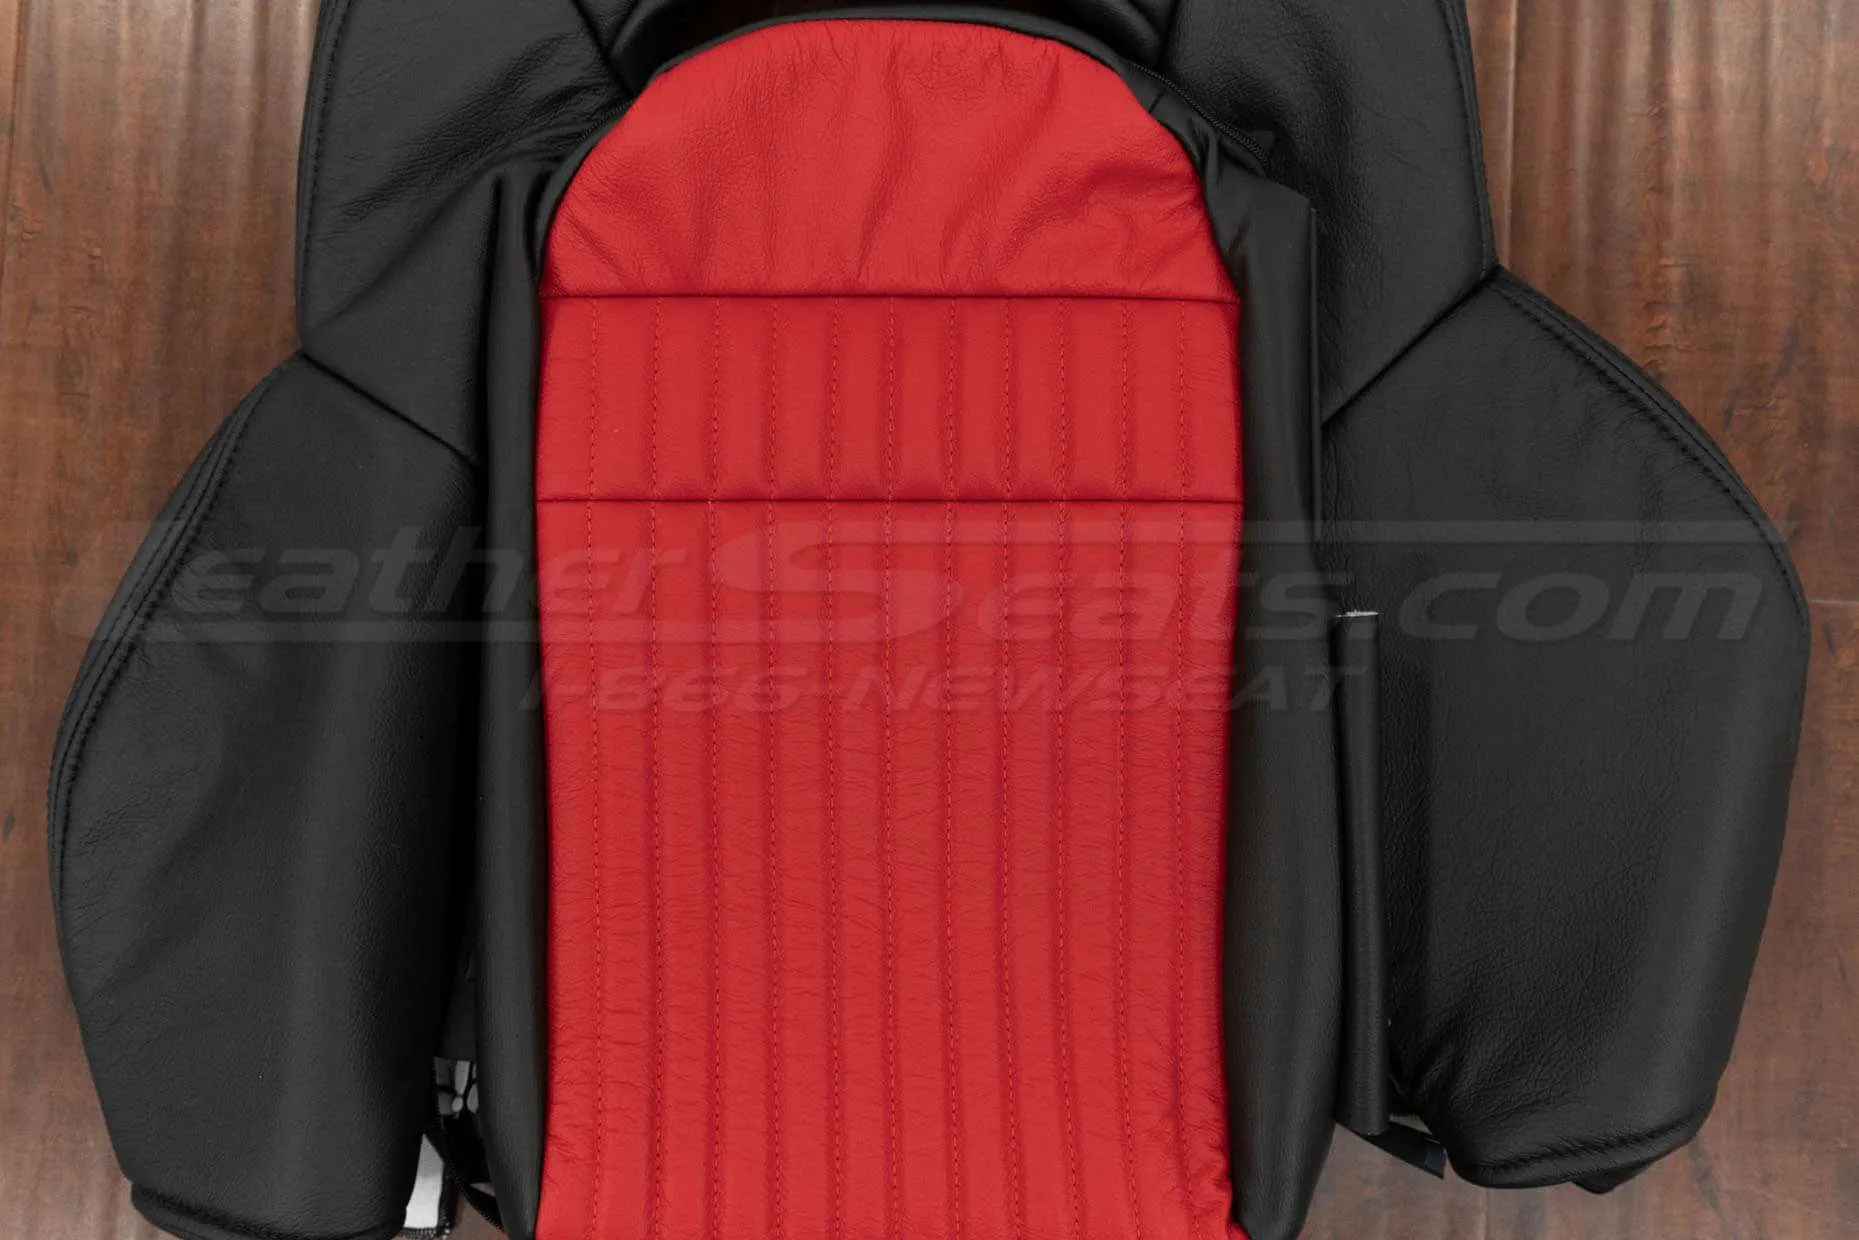 Bright Red Body section of backrest